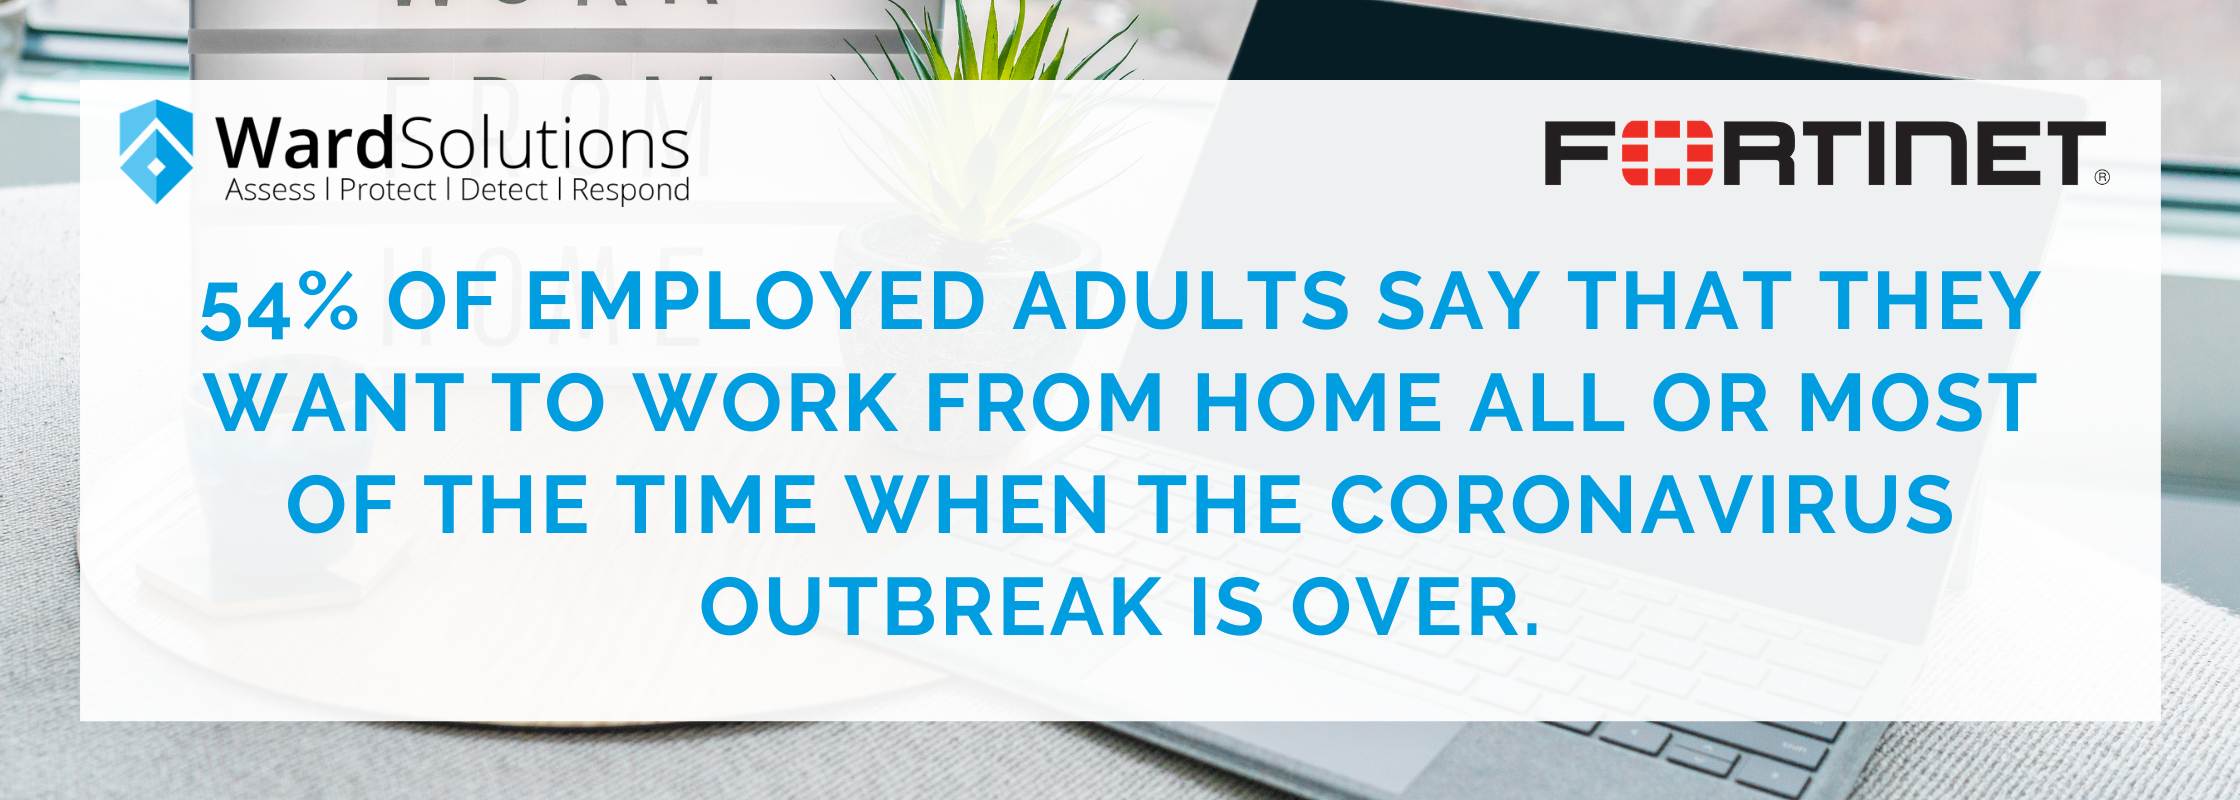 54% of employed adults say that they want to work from home all or most of the time when the coronavirus outbreak is over.